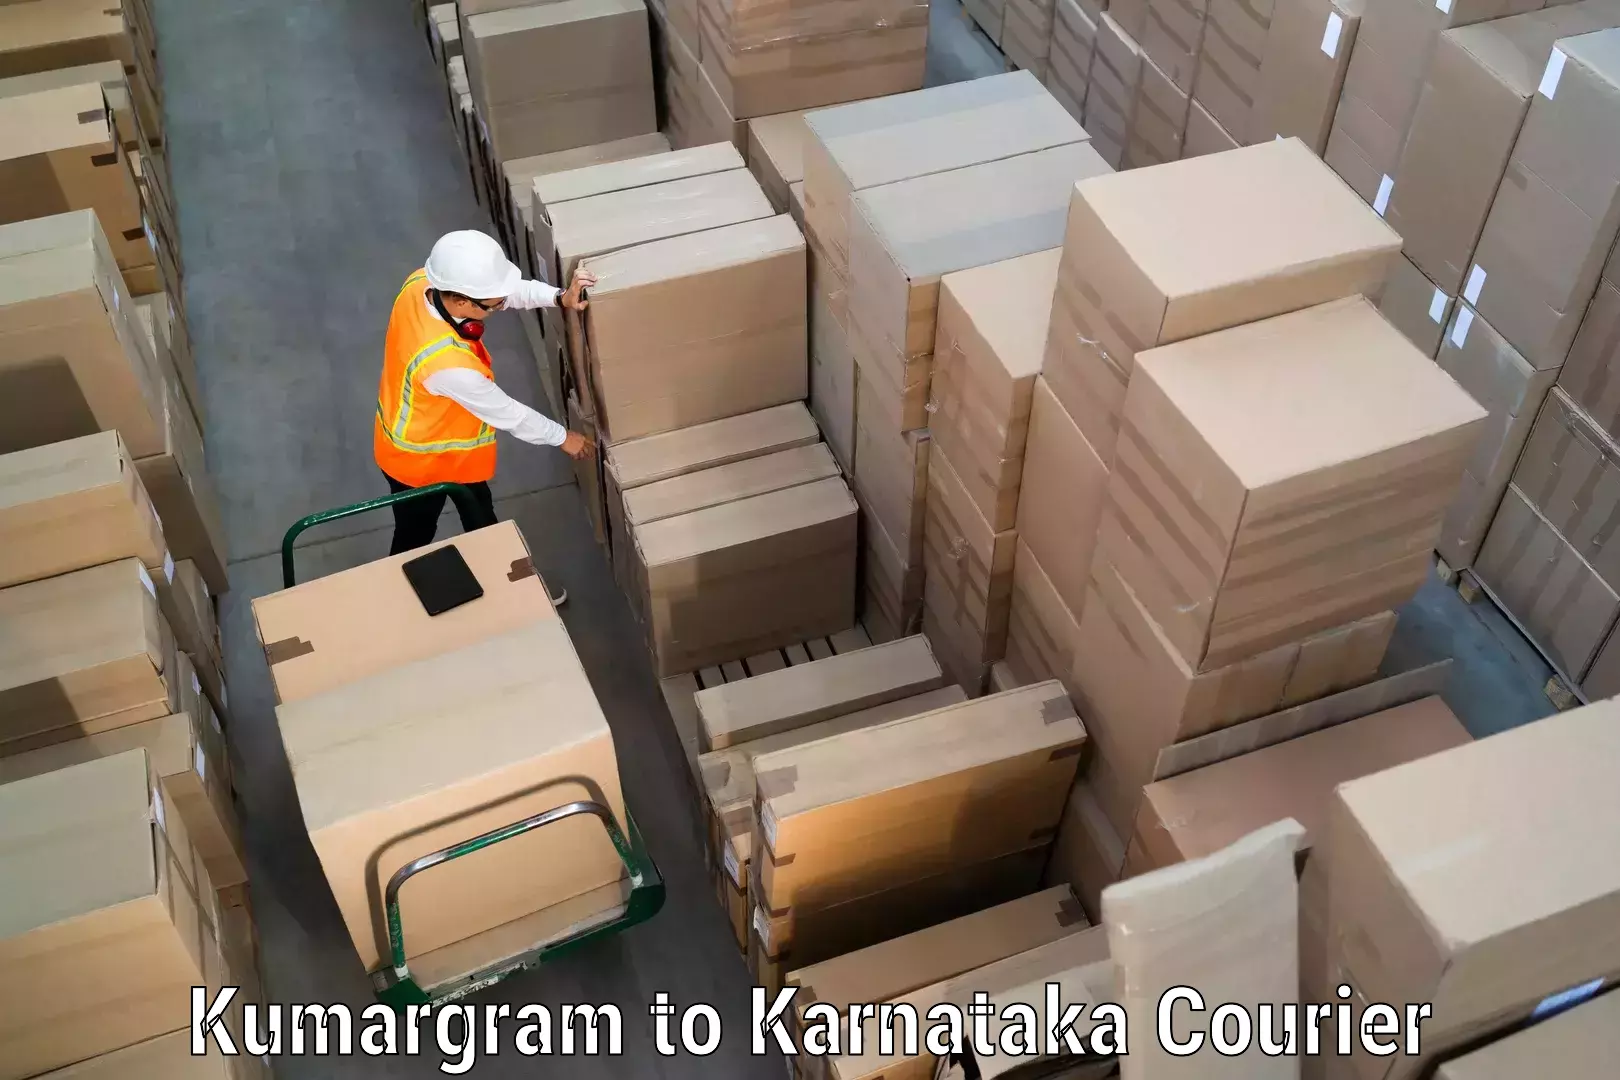 Reliable courier service Kumargram to Anavatti